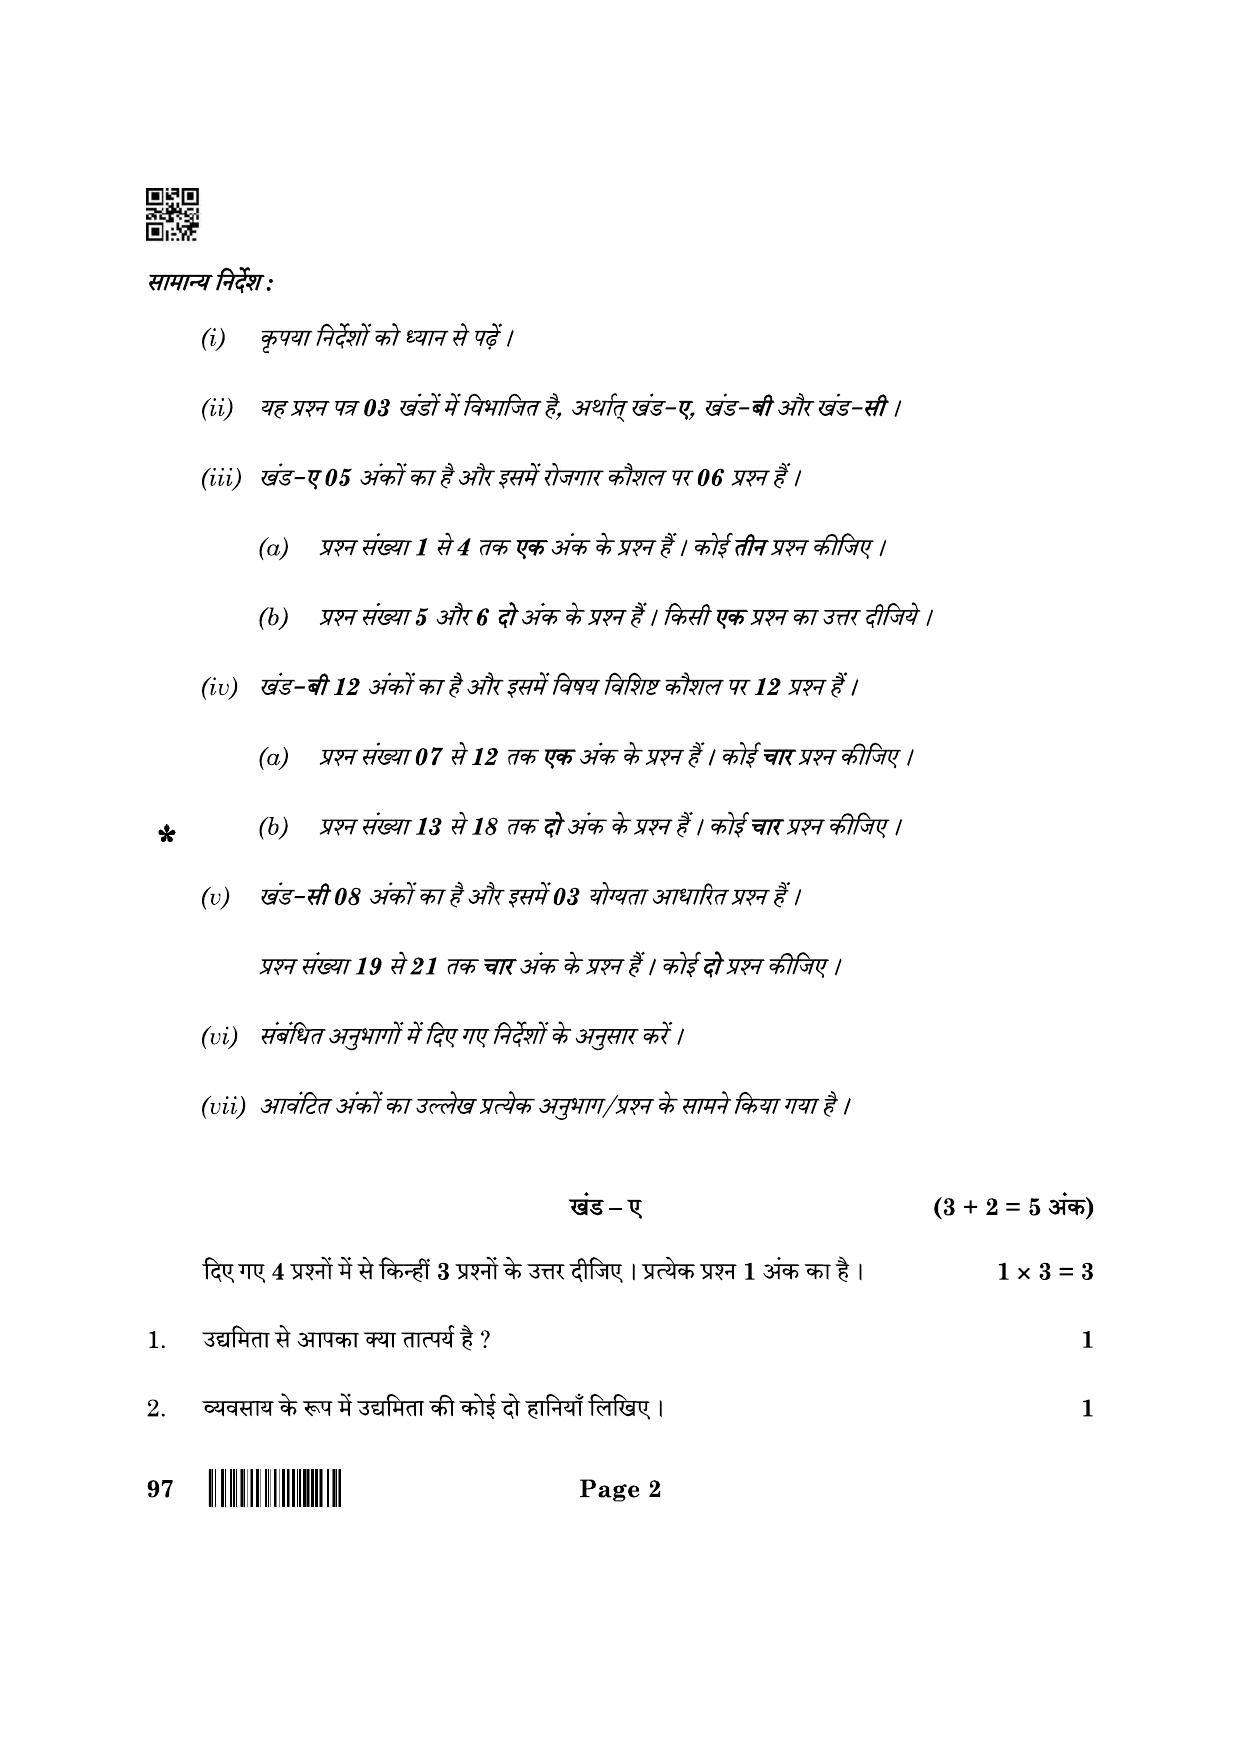 CBSE Class 10 97 Front Office Operations 2022 Question Paper - Page 2